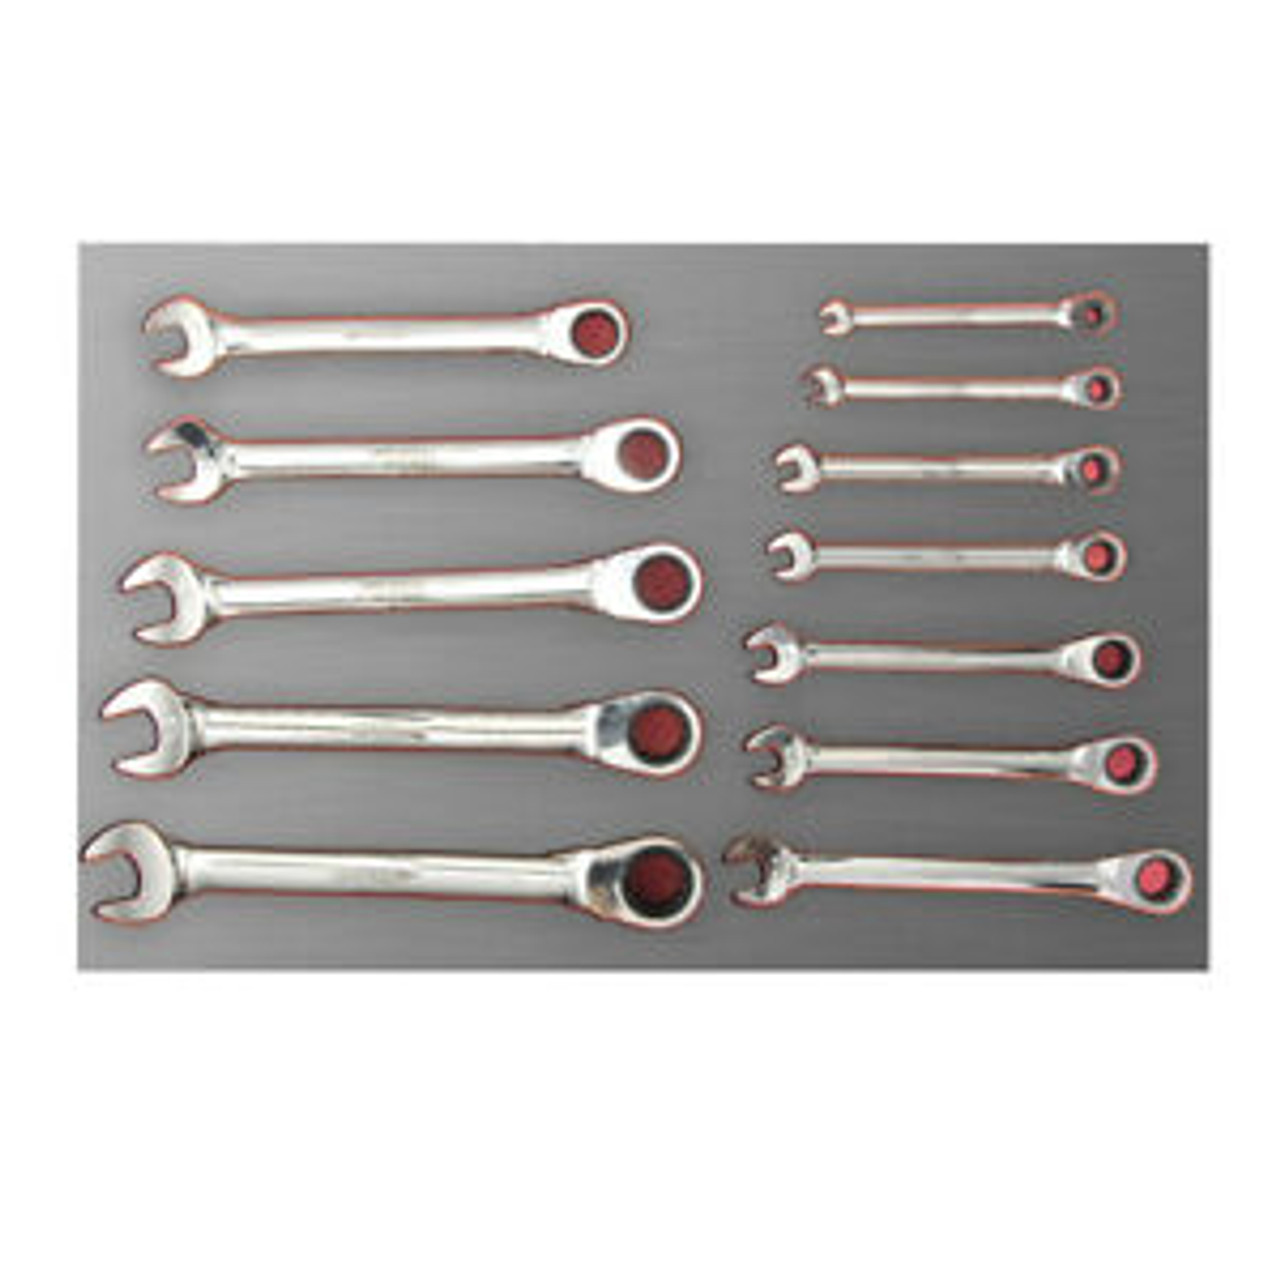 URREA 12 pc COMBINATION RATCHETING WRENCH SETS WITH EVA LAMINATED PLASTIC COVER #CH312L